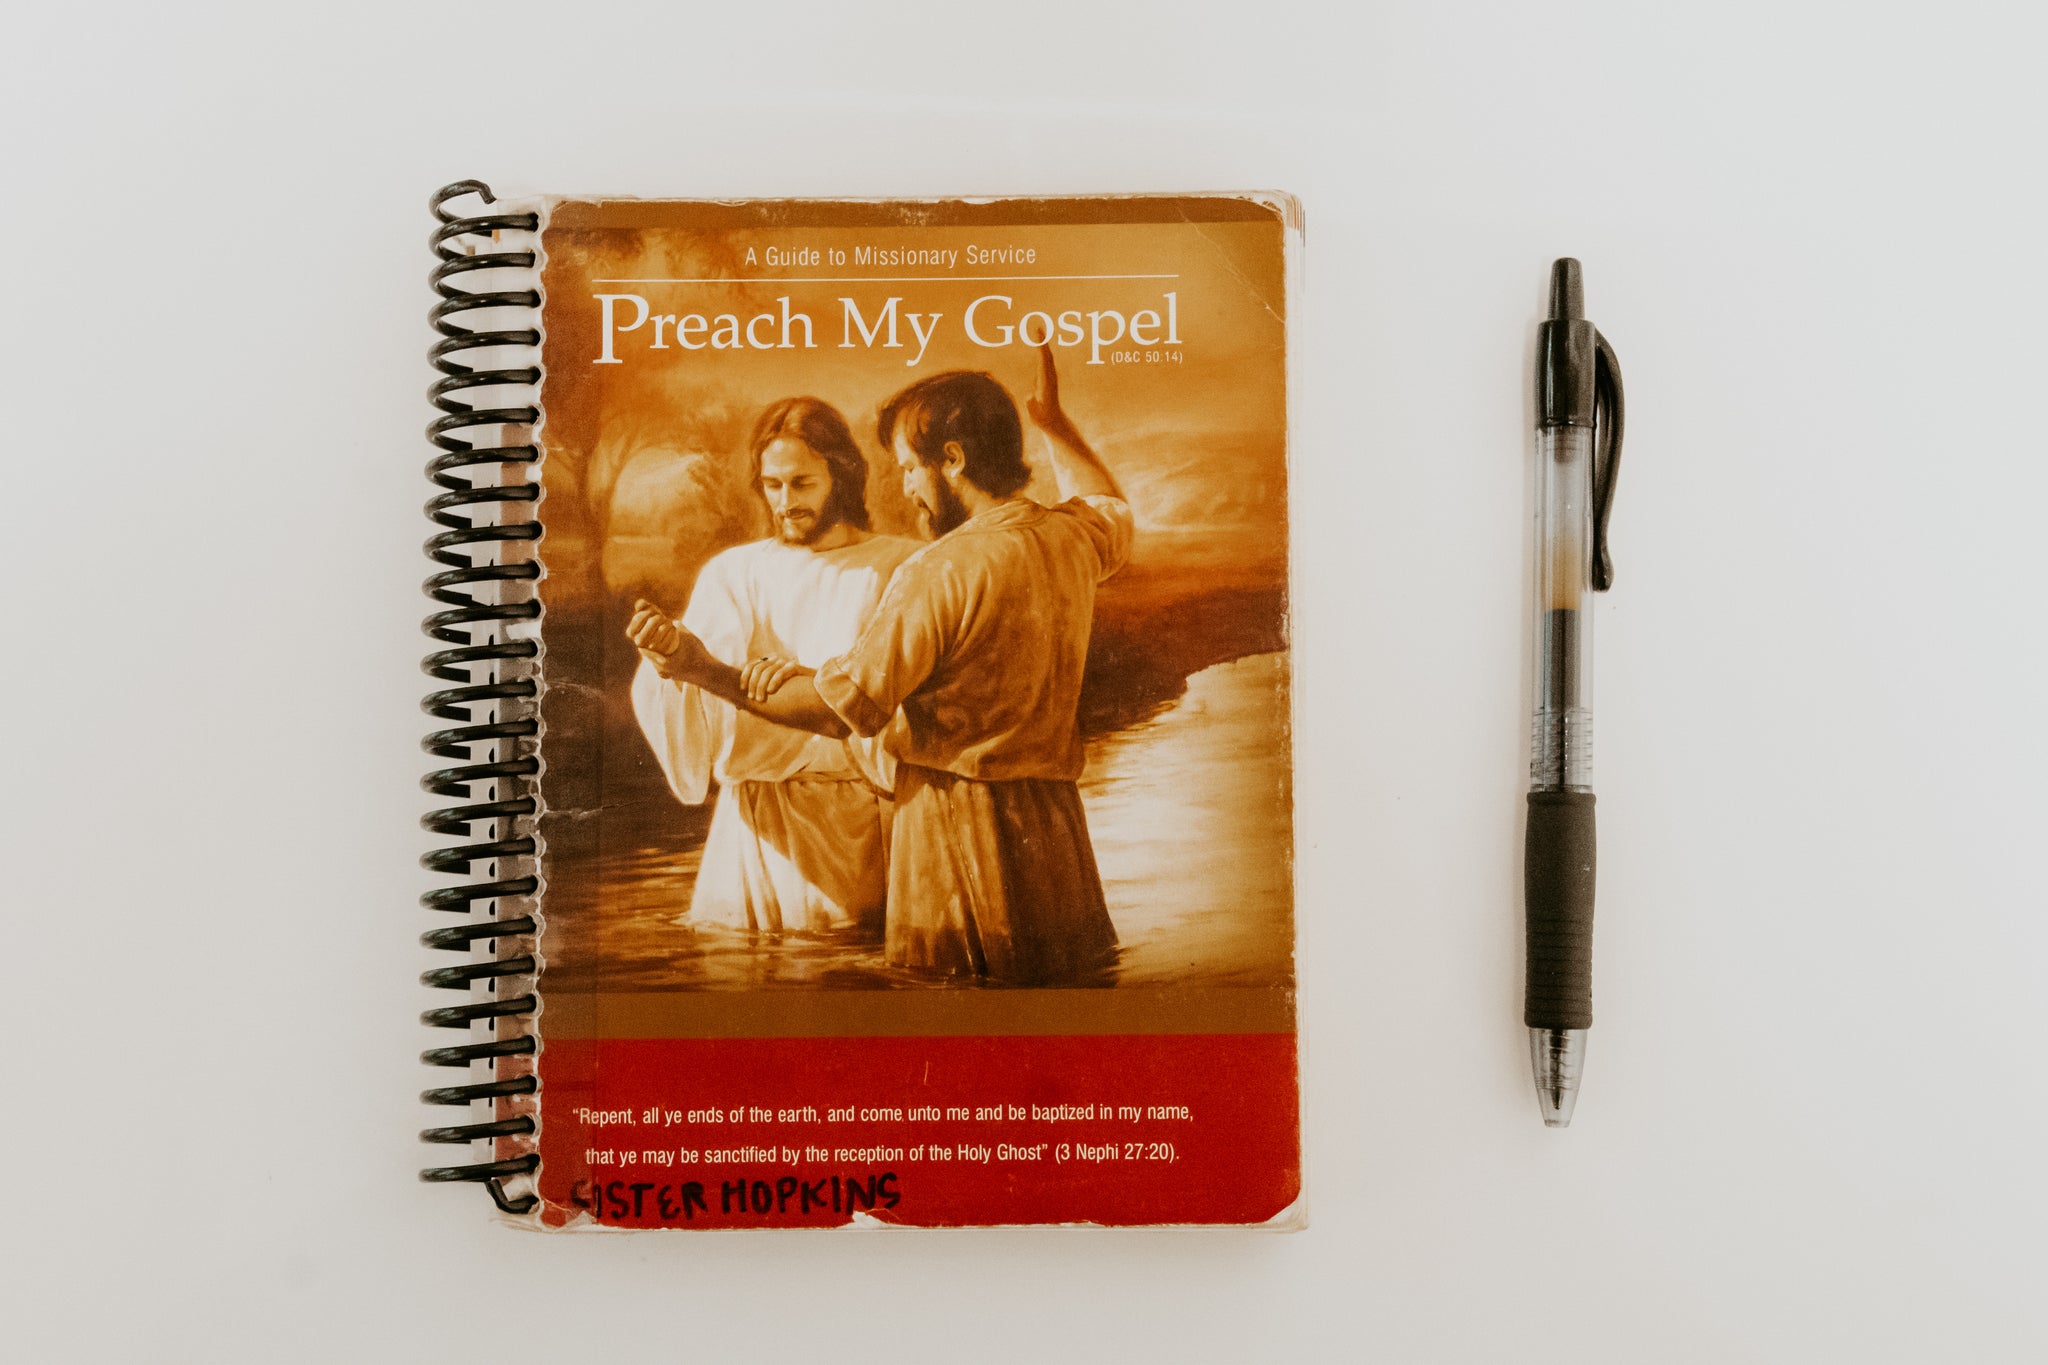 2020 "Come, Follow Me" and "Preach My Gospel" Reading Schedule